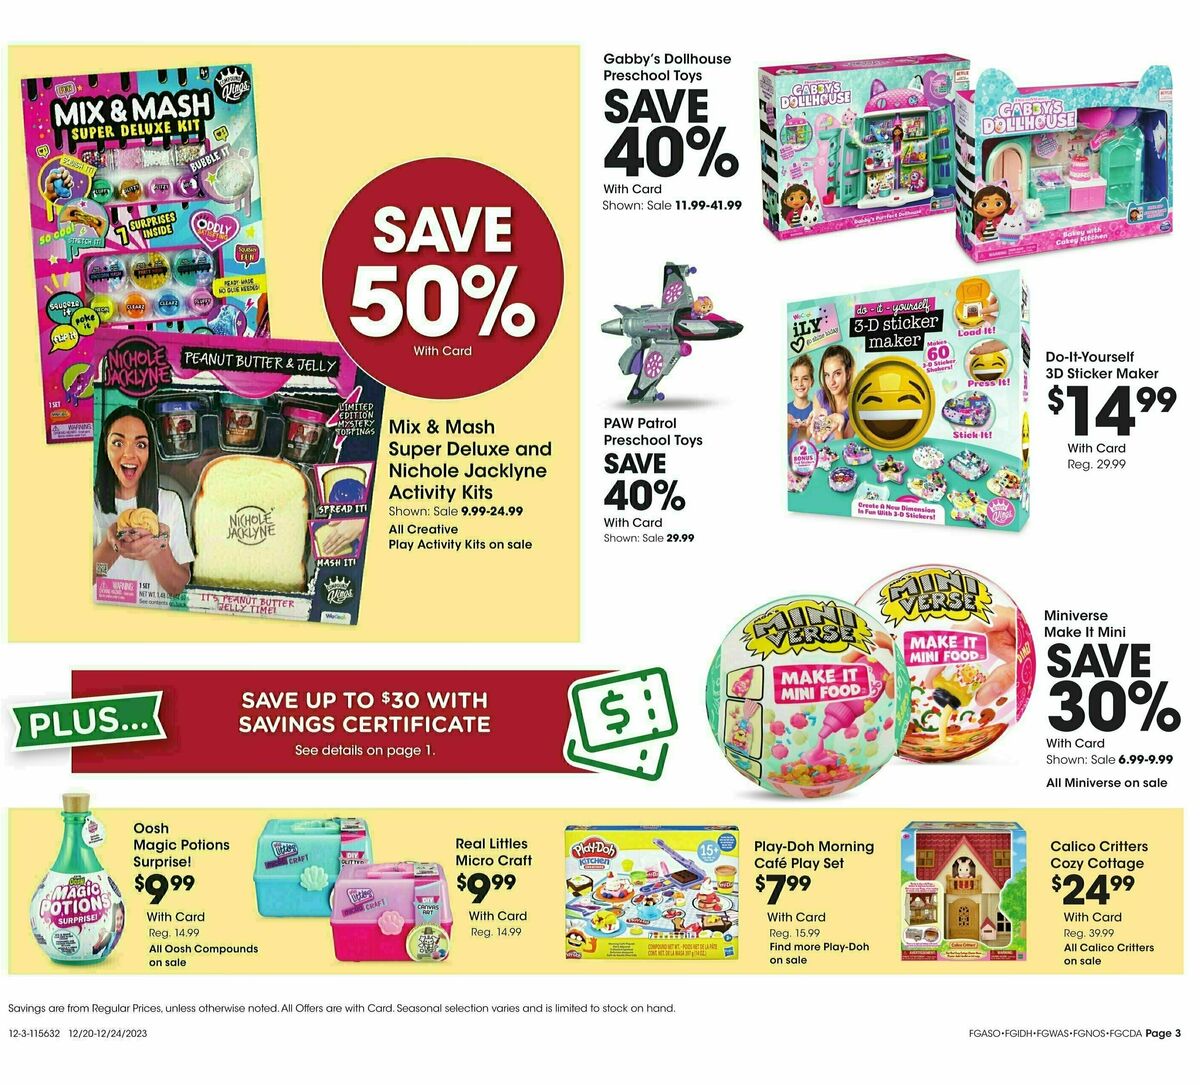 Fred Meyer General Merchandise Weekly Ad from December 20